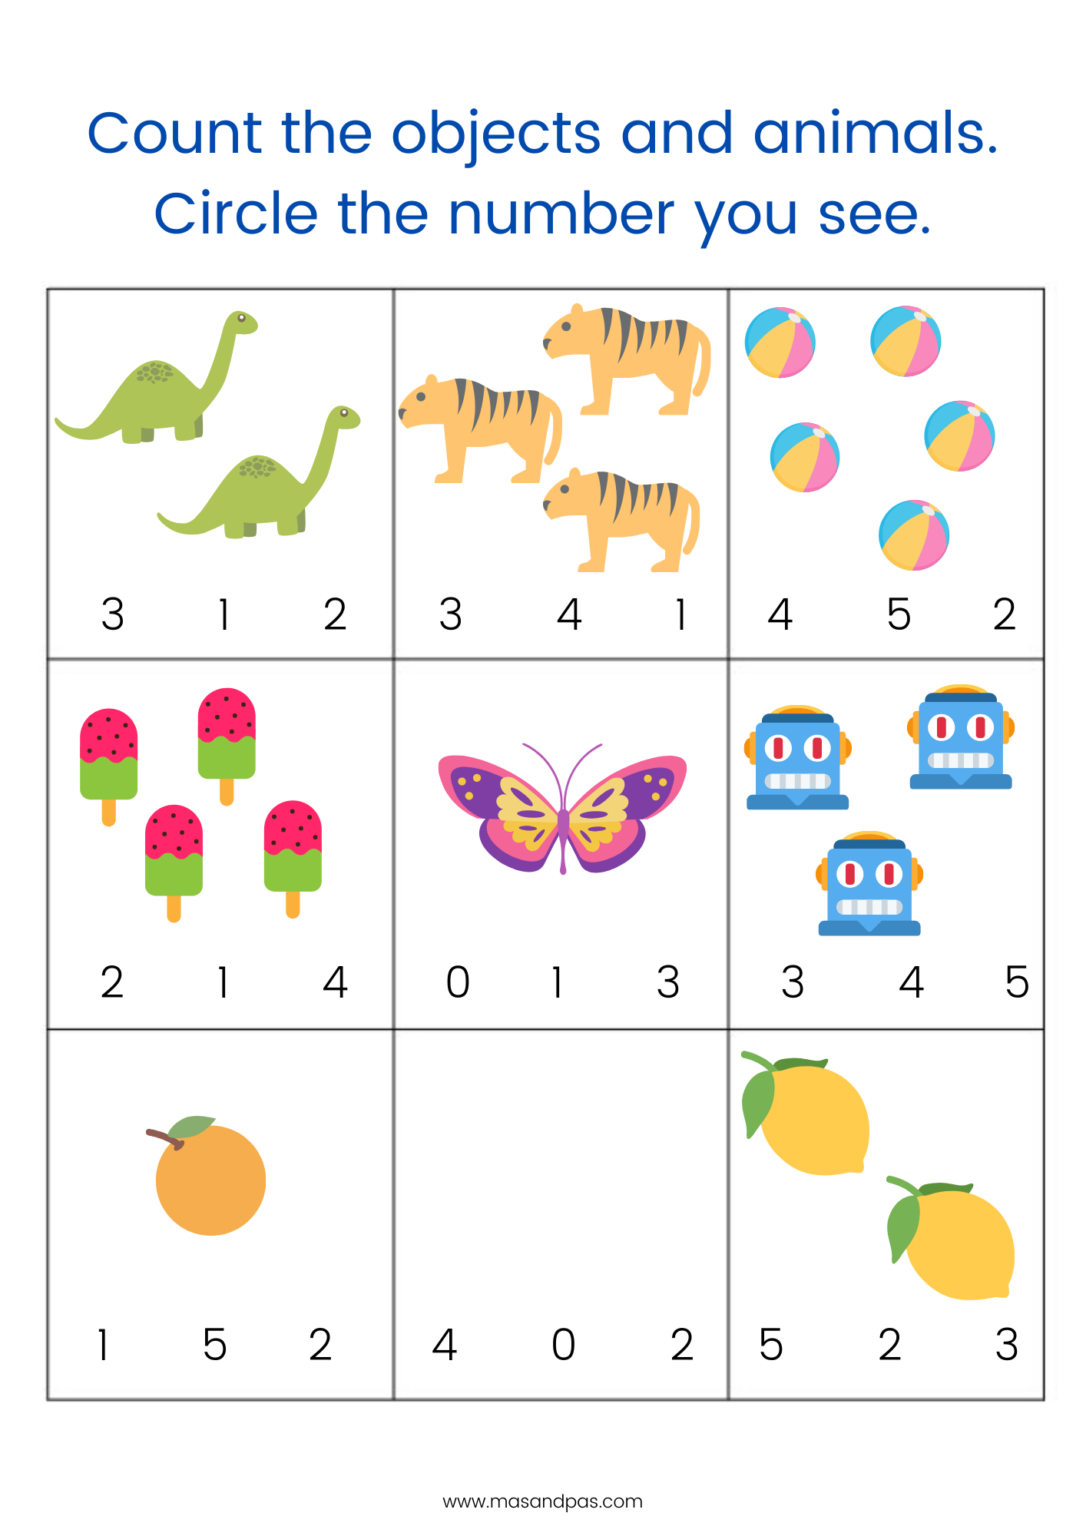 for iphone download Number Kids - Counting Numbers & Math Games